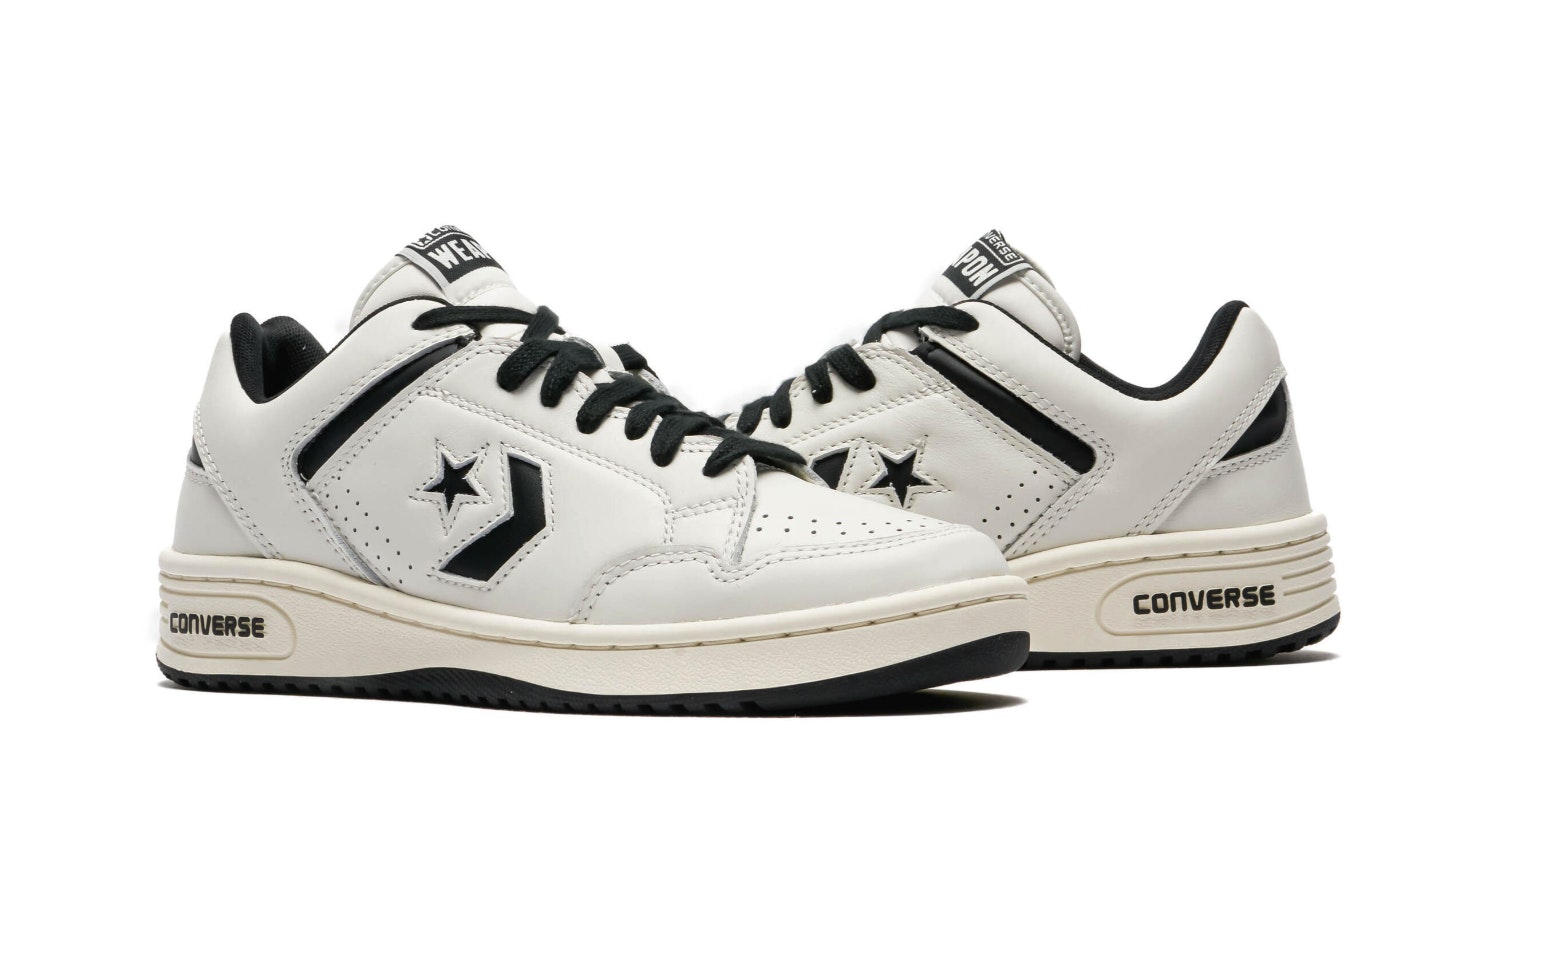 Old Money x Converse Weapon OX Low "Vintage White"